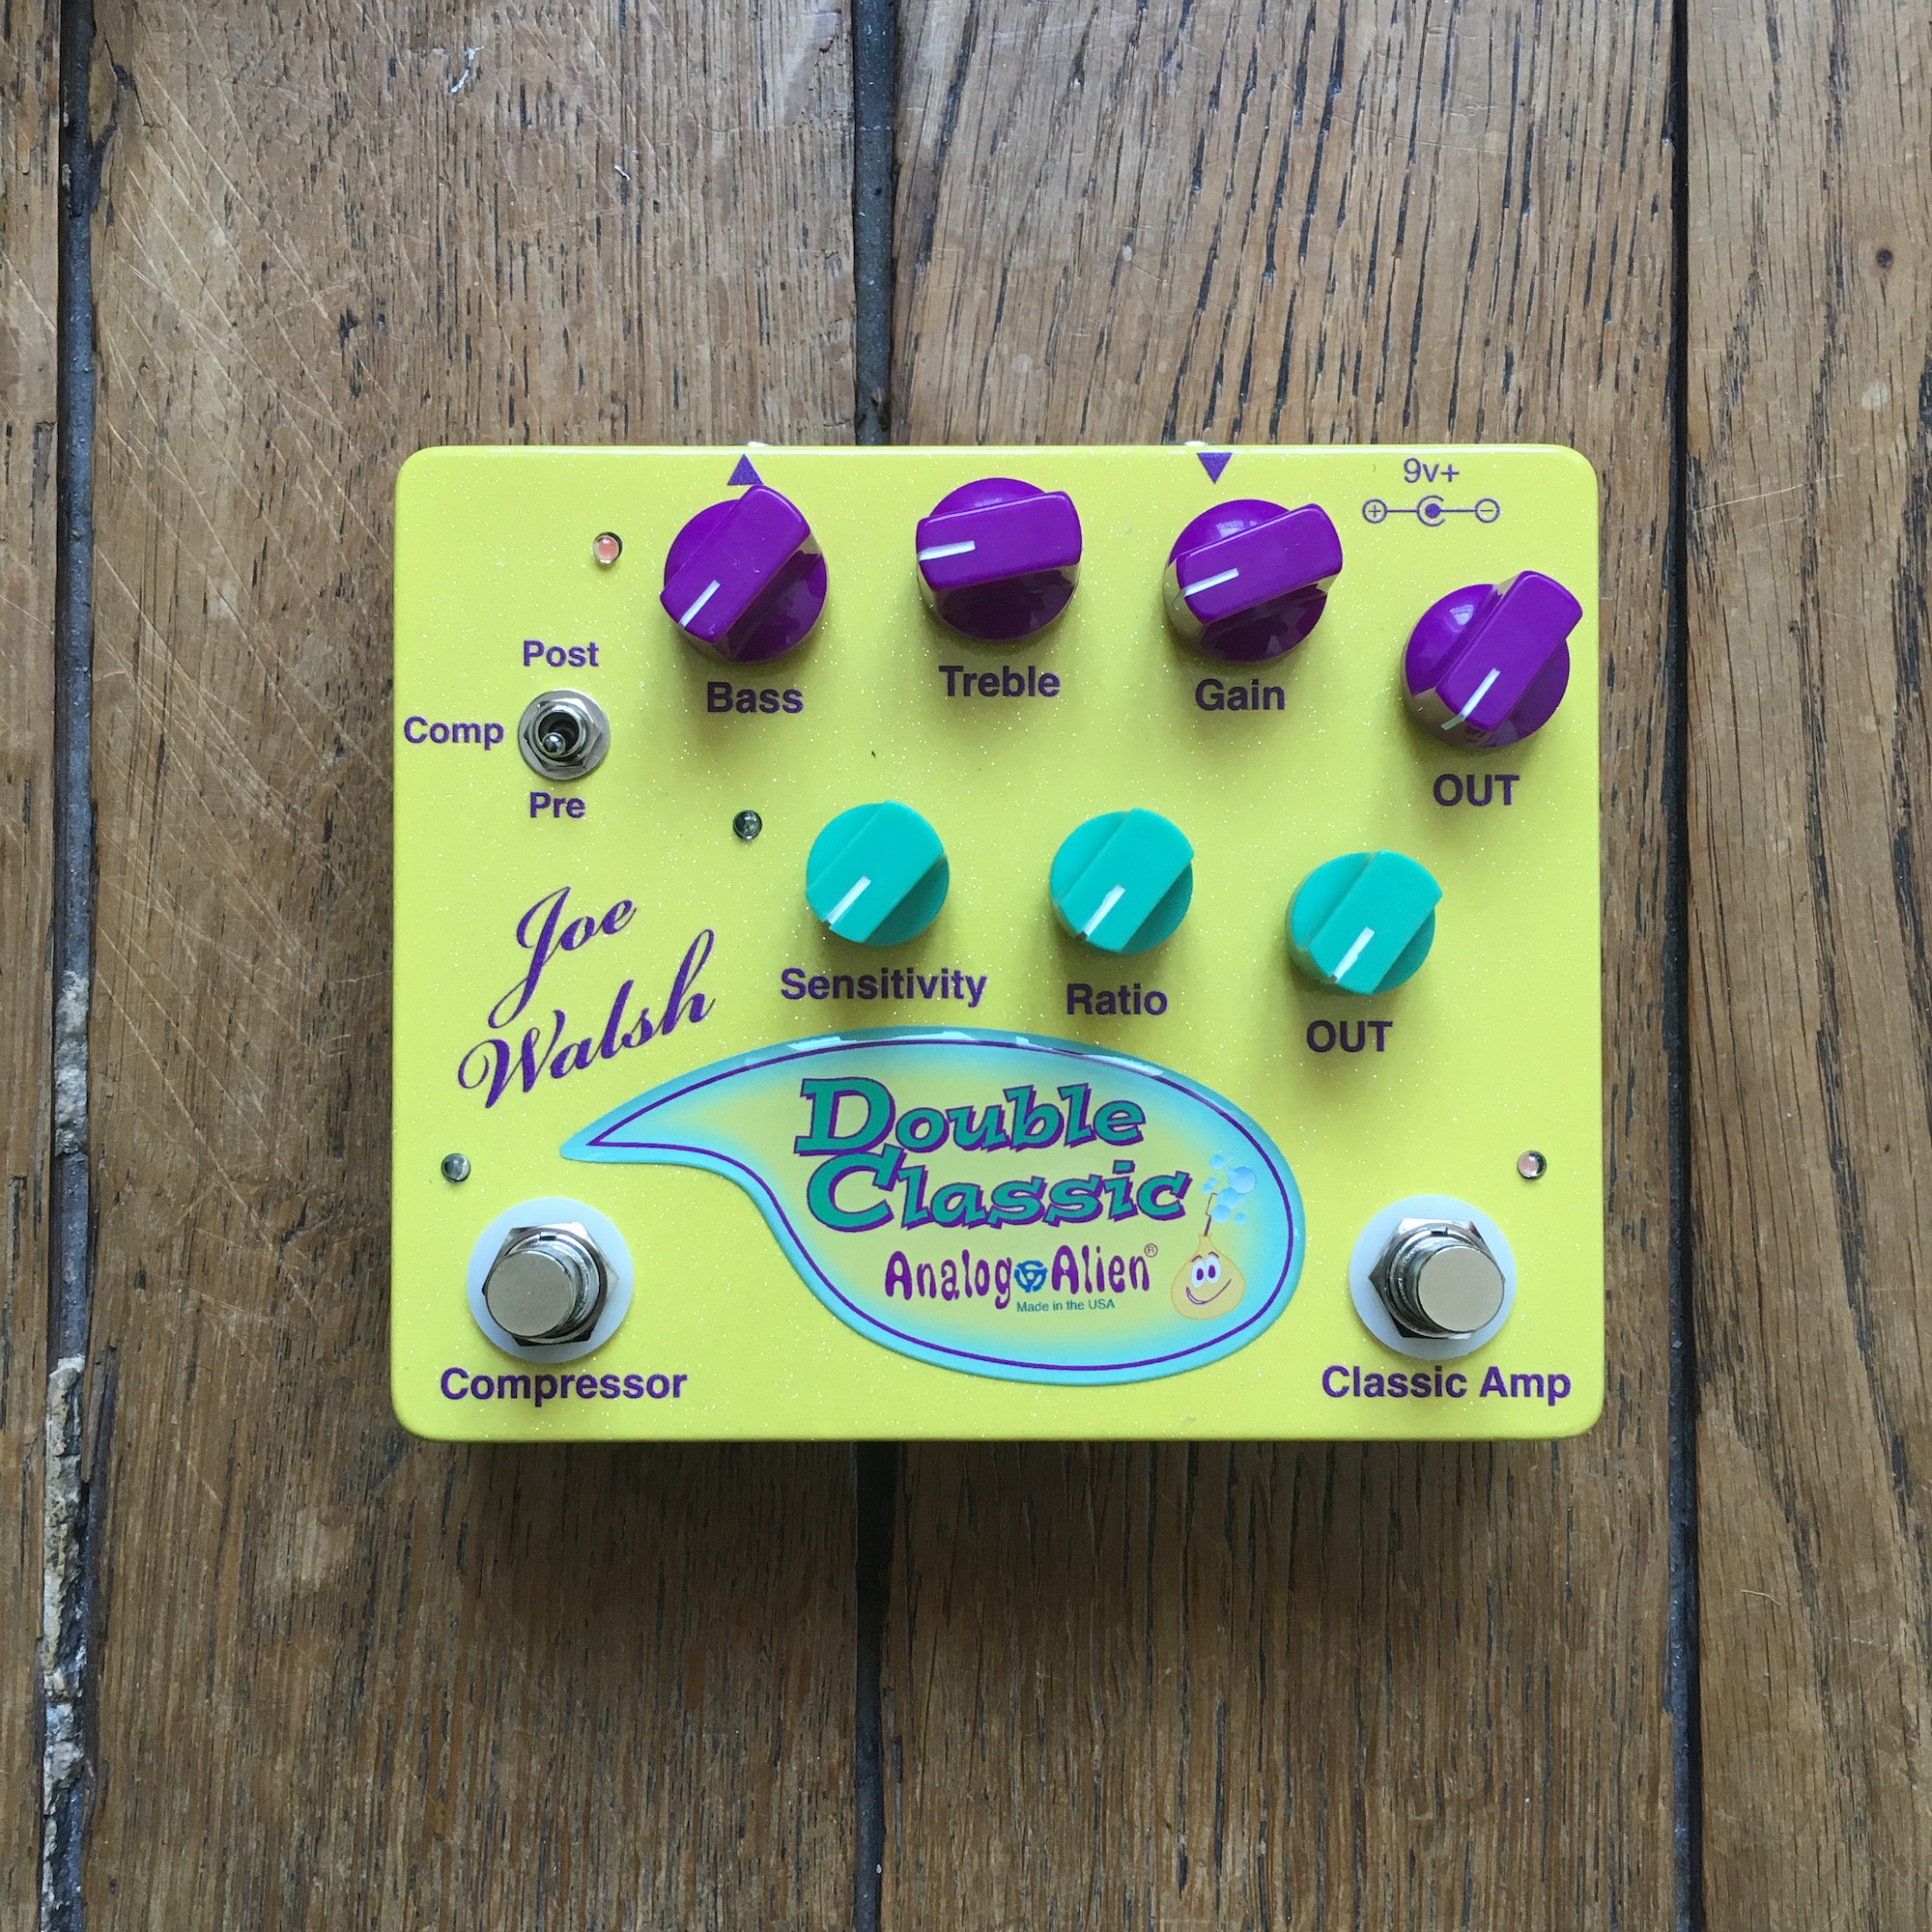 Pedal Review - Joe Walsh Double Classic from Analog Alien: overdrive/compressor